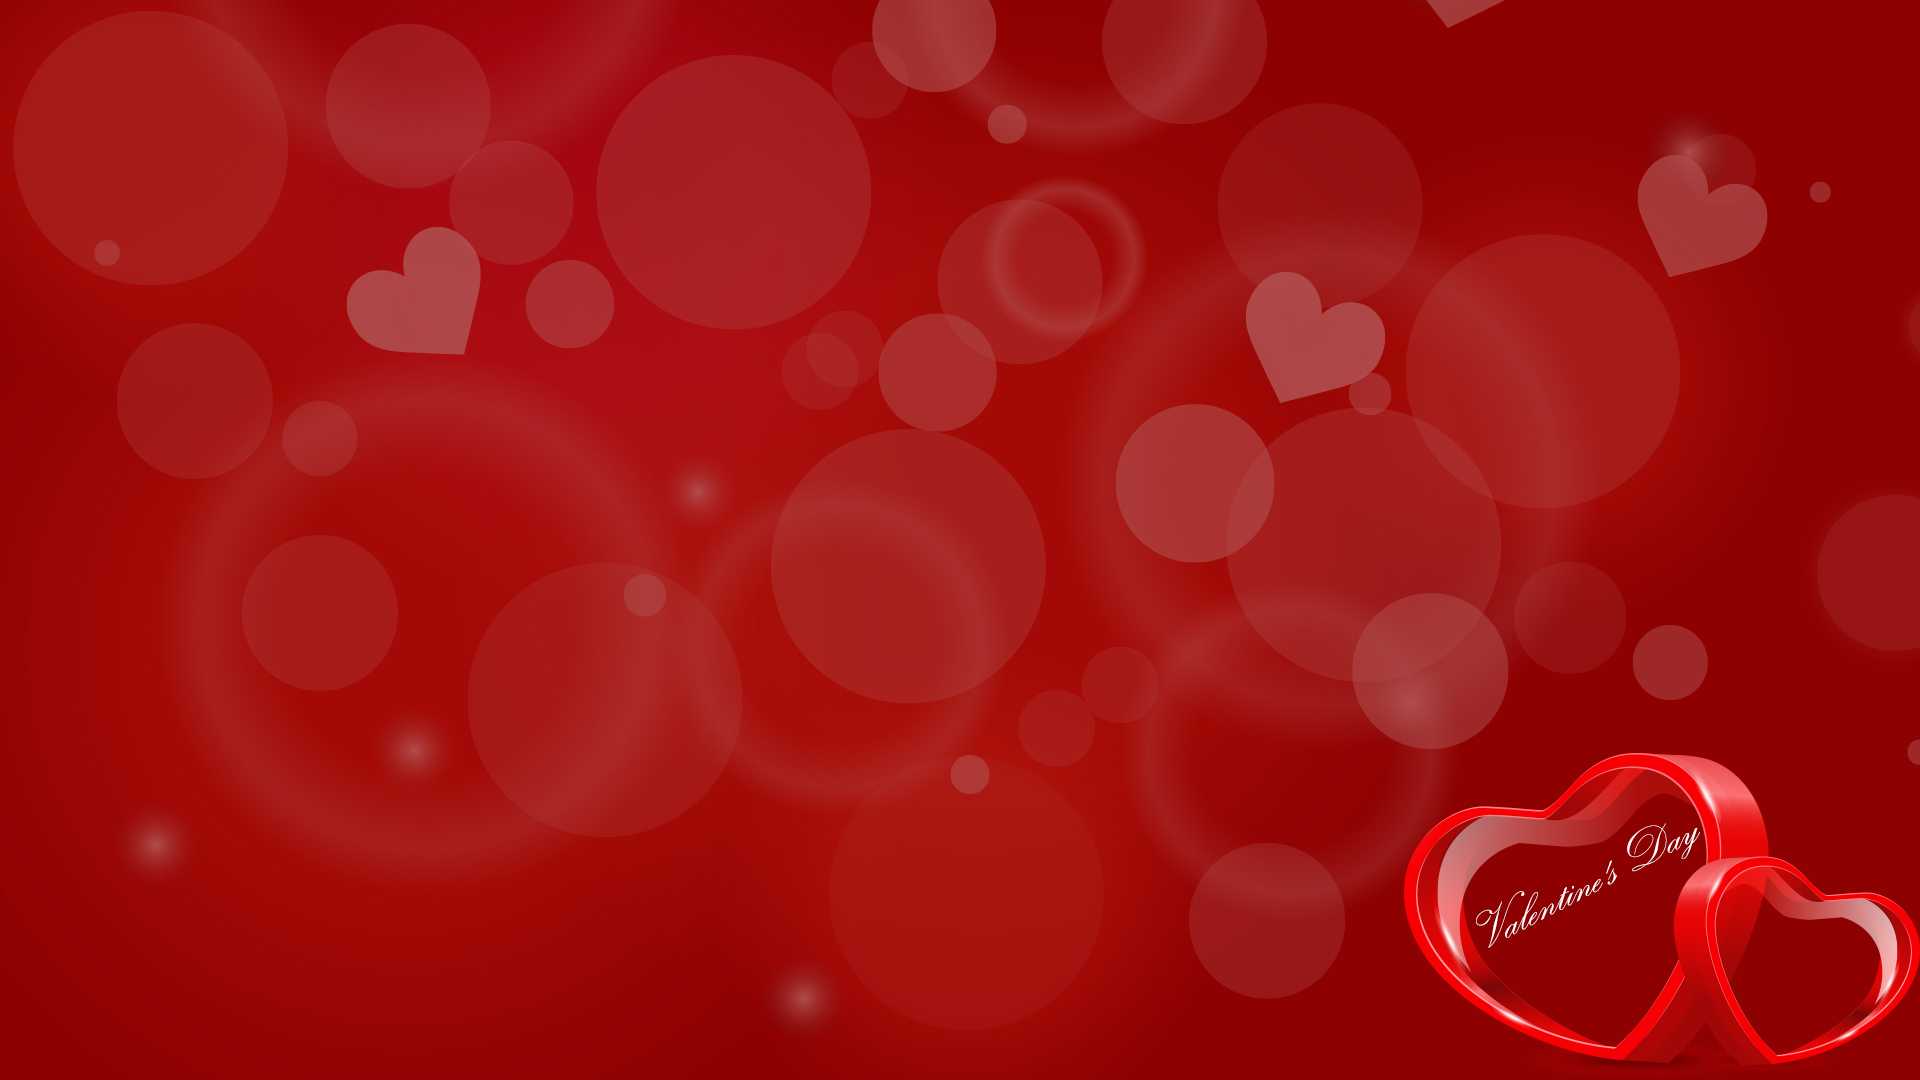 Valentines Day Heart Backgrounds For Powerpoint - Love Ppt Inside Valentine Powerpoint Templates Free